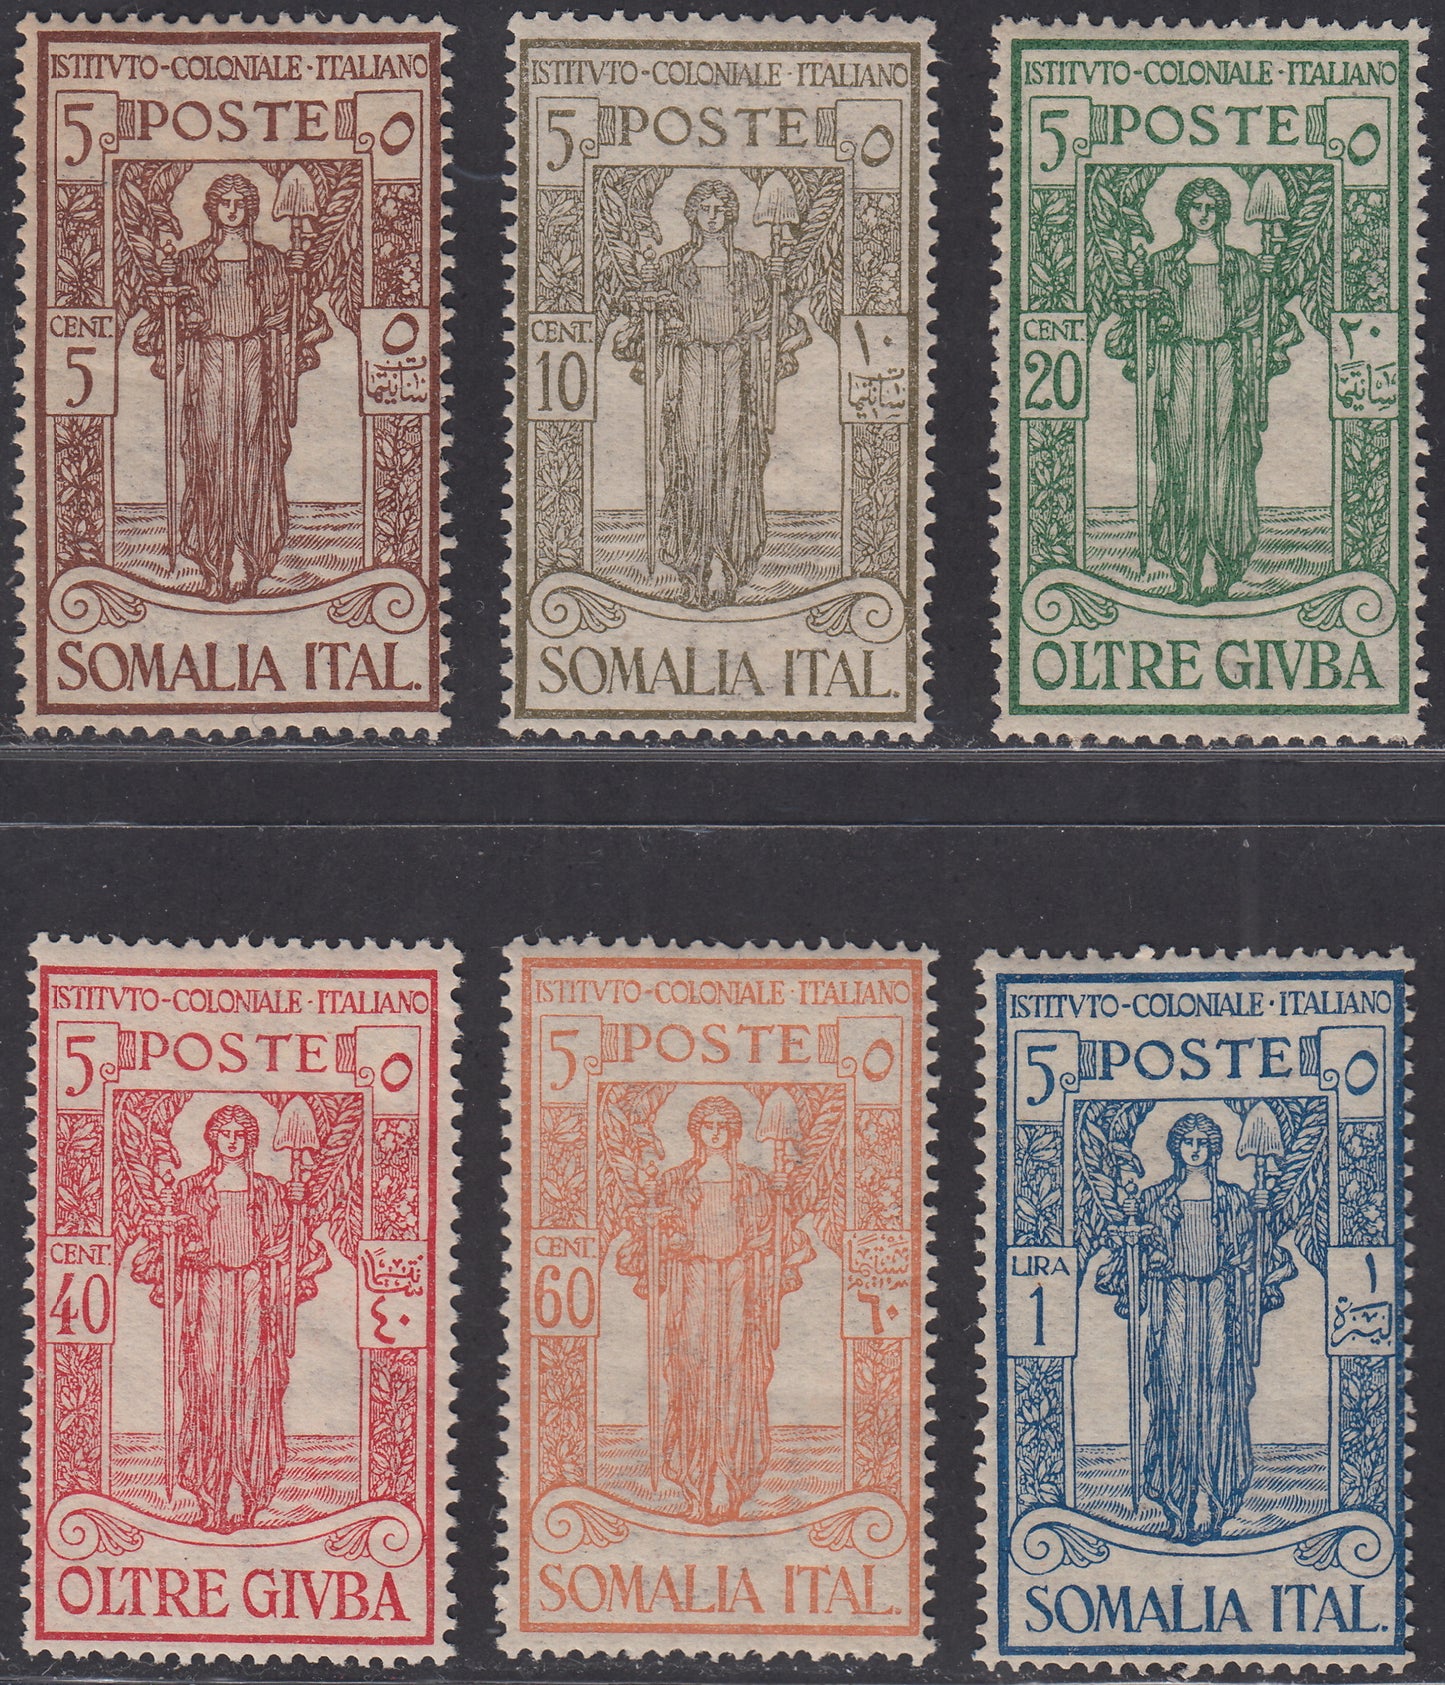 SOM15 - 1926 - Pro Istituto Coloniale Italiano, complete set of six new stamps with traces of hinge (86/91)